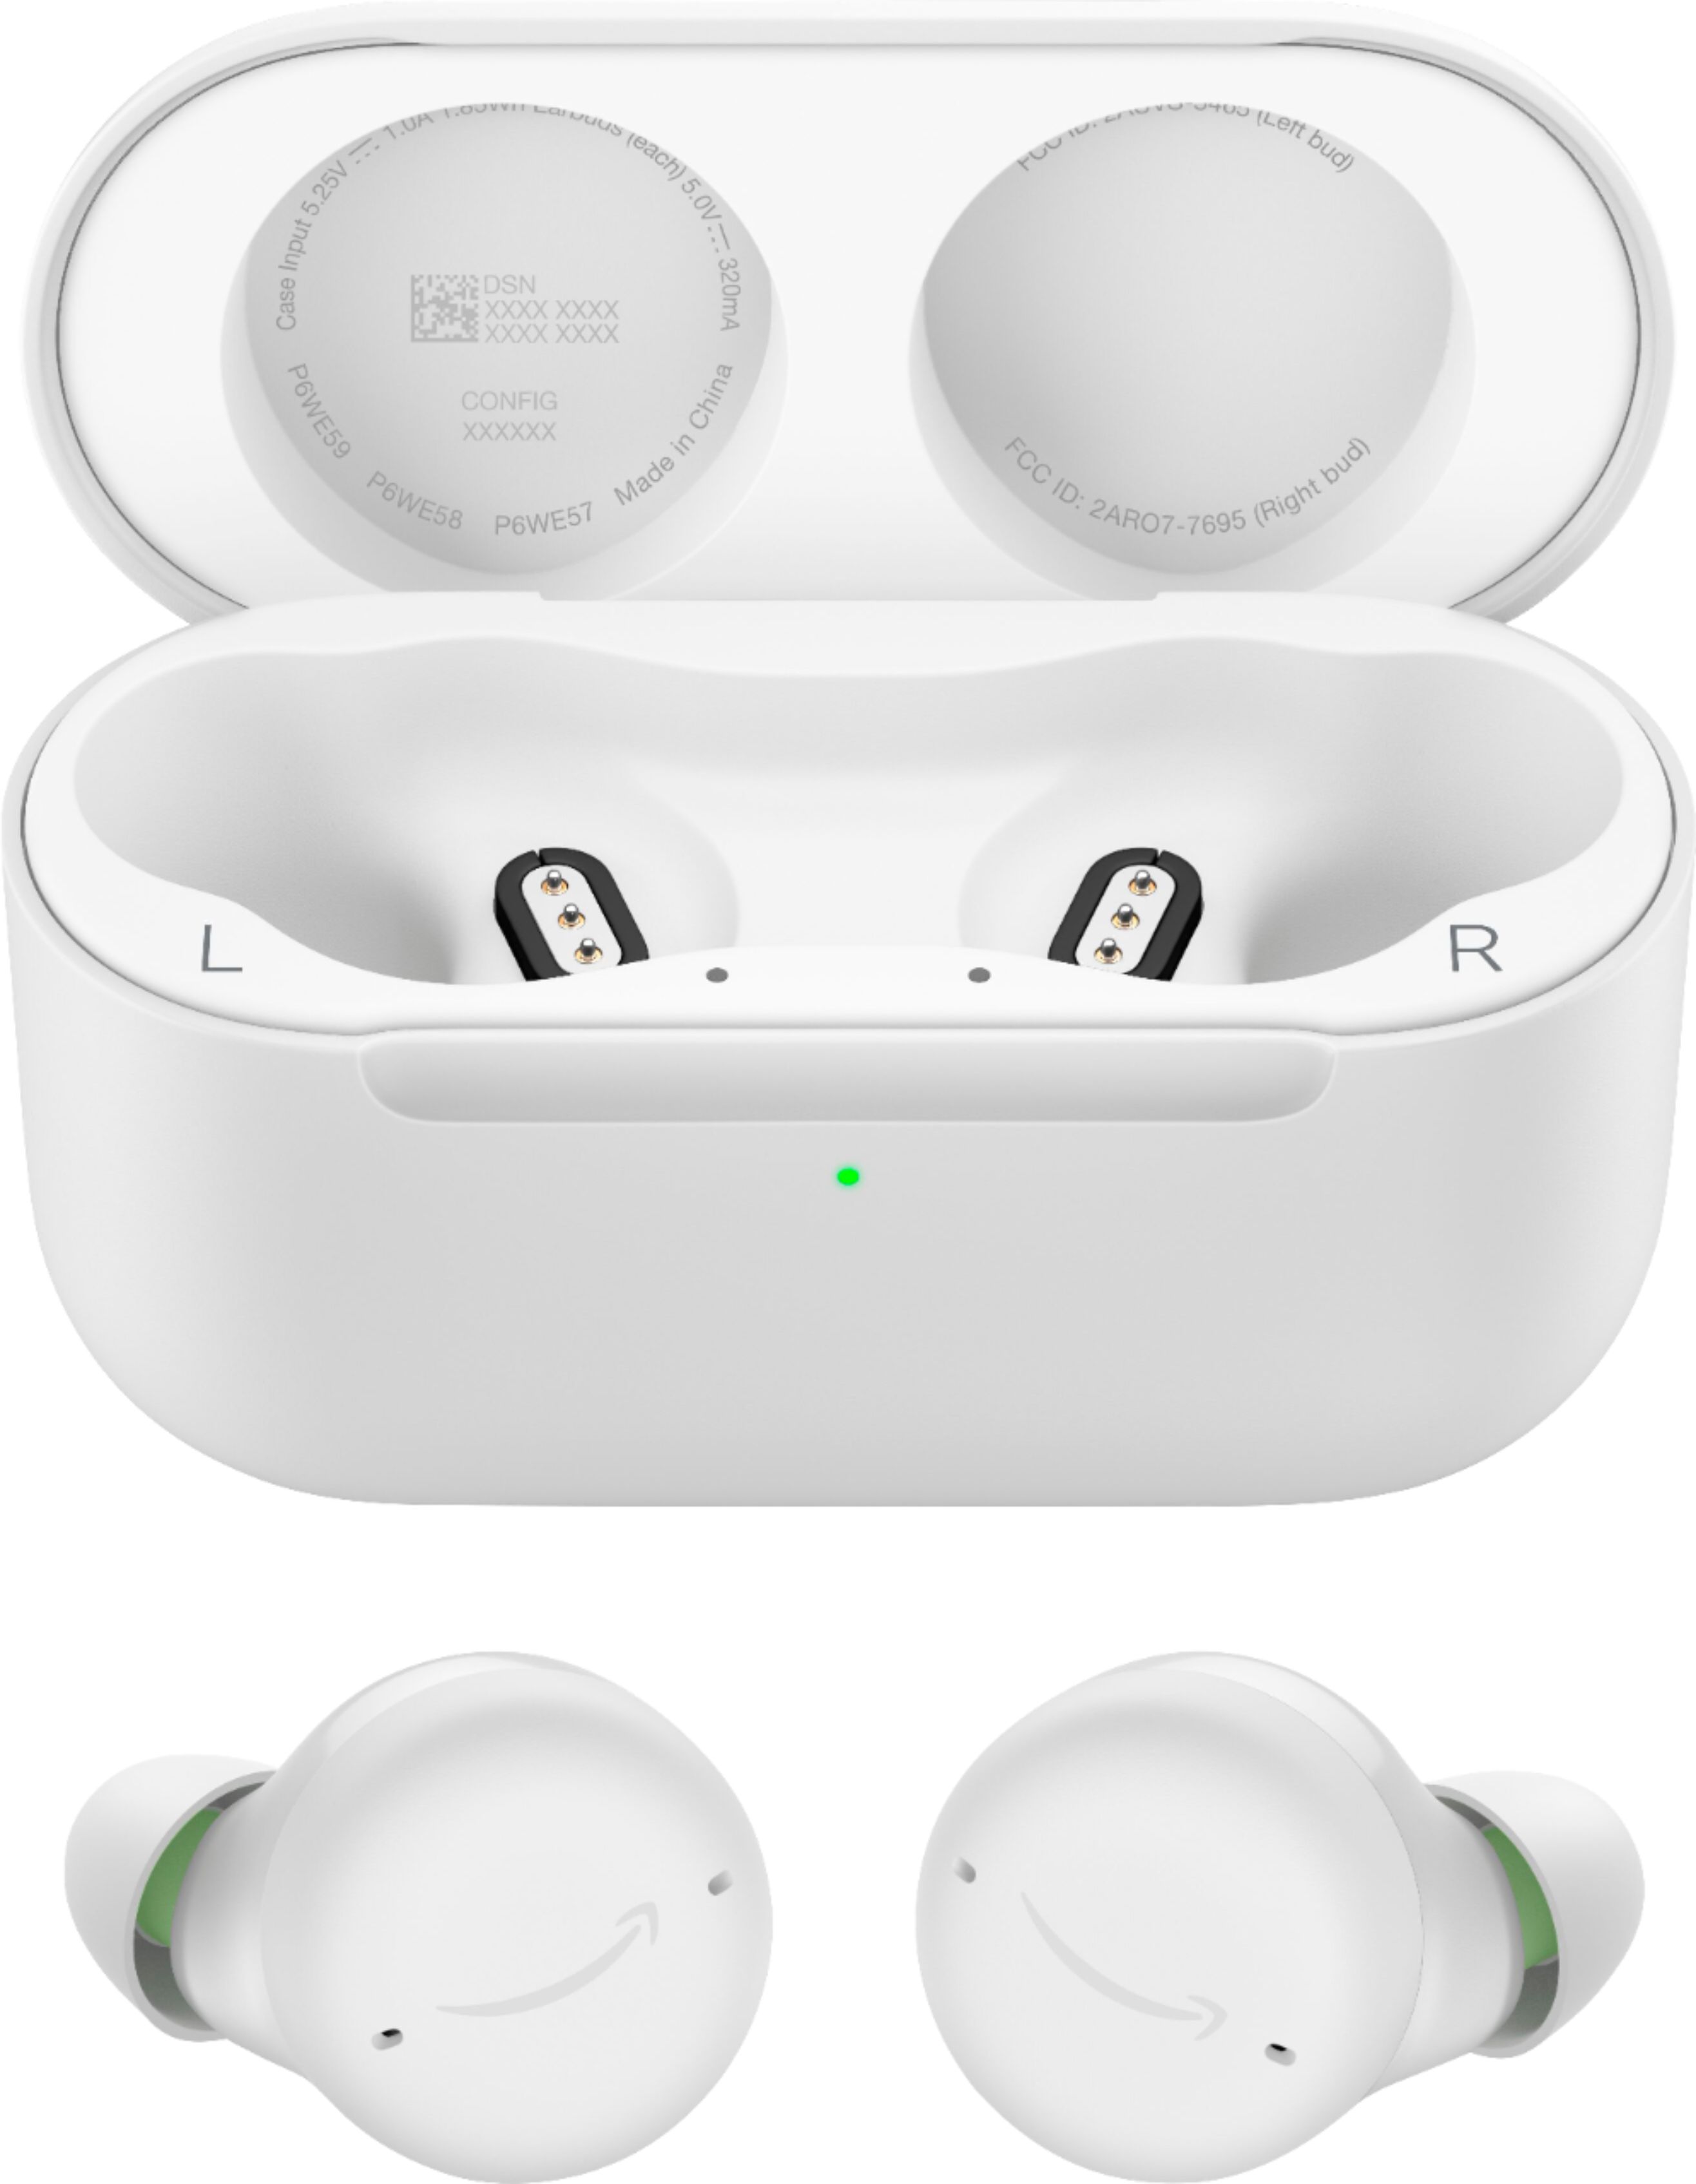 Echo Buds 2nd Gen with active noise cancellation, hands